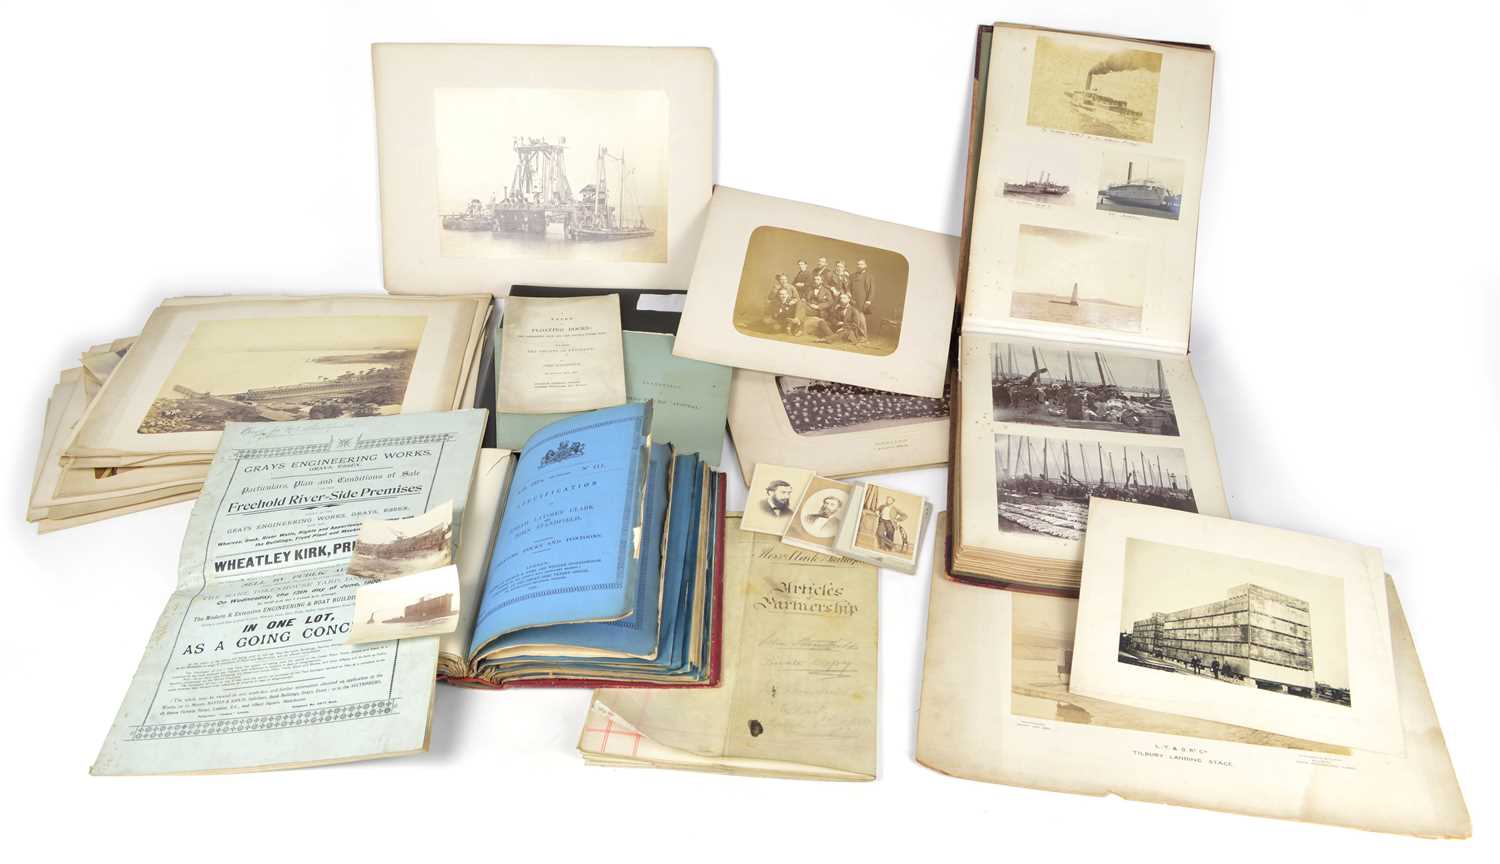 Lot 67 - Collection of photographs, documents, patents and ephemera relating to John Standfield (1838-1890)